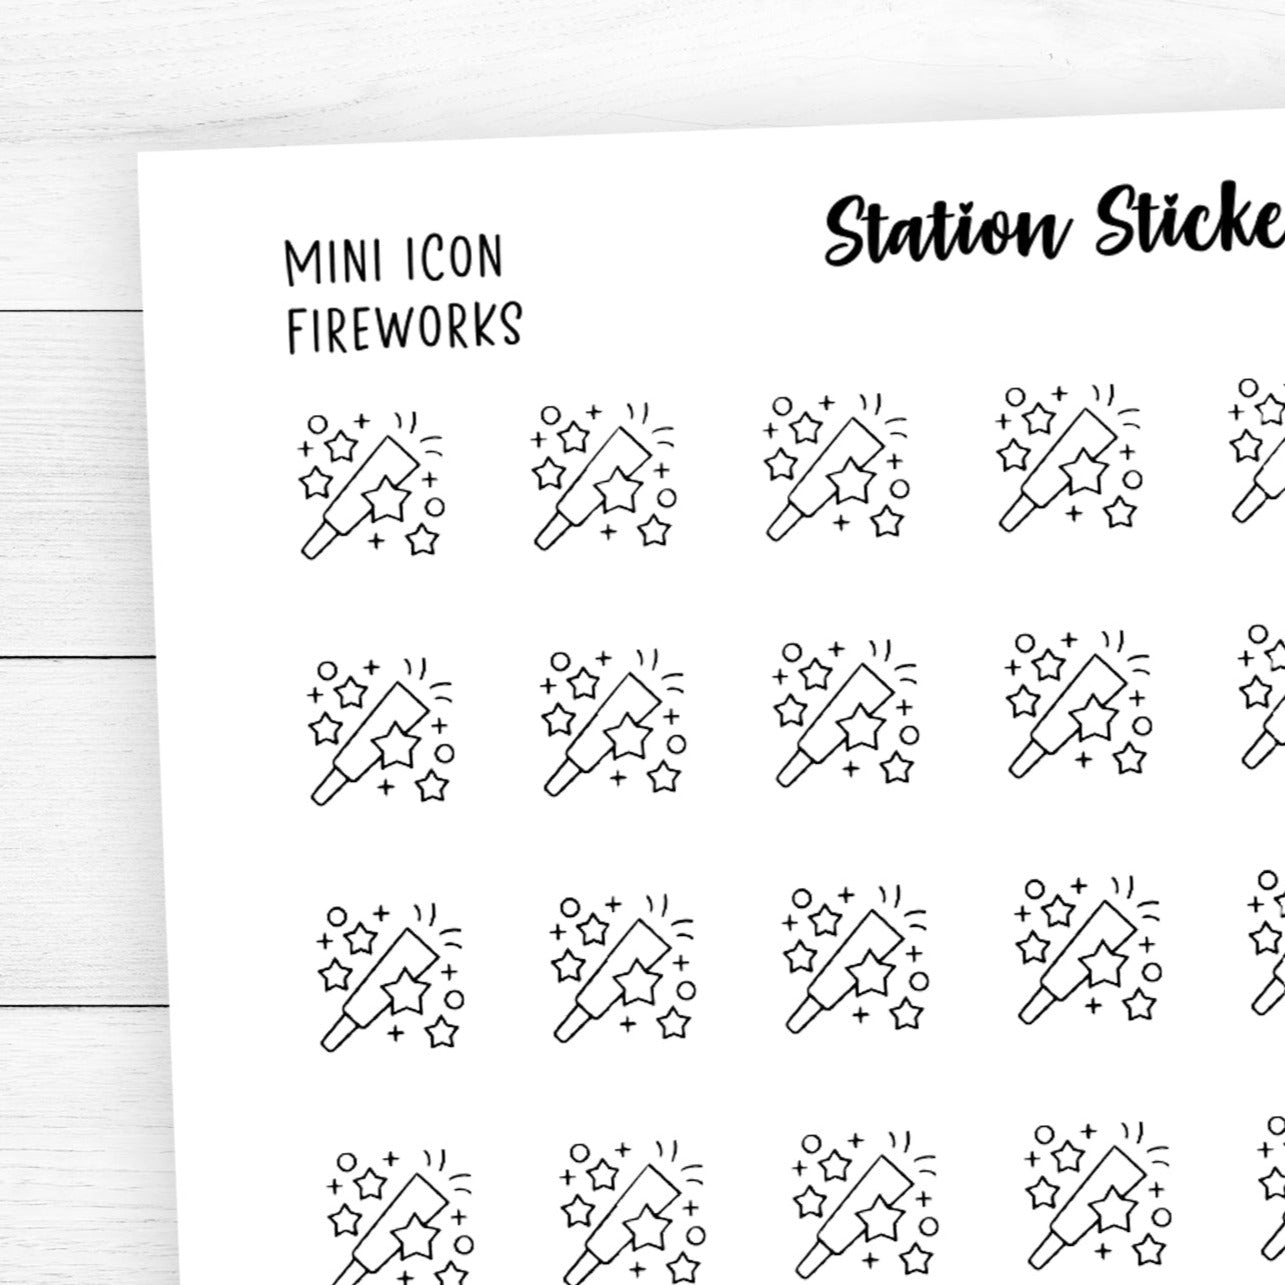 Fireworks Icon Stickers - Station Stickers